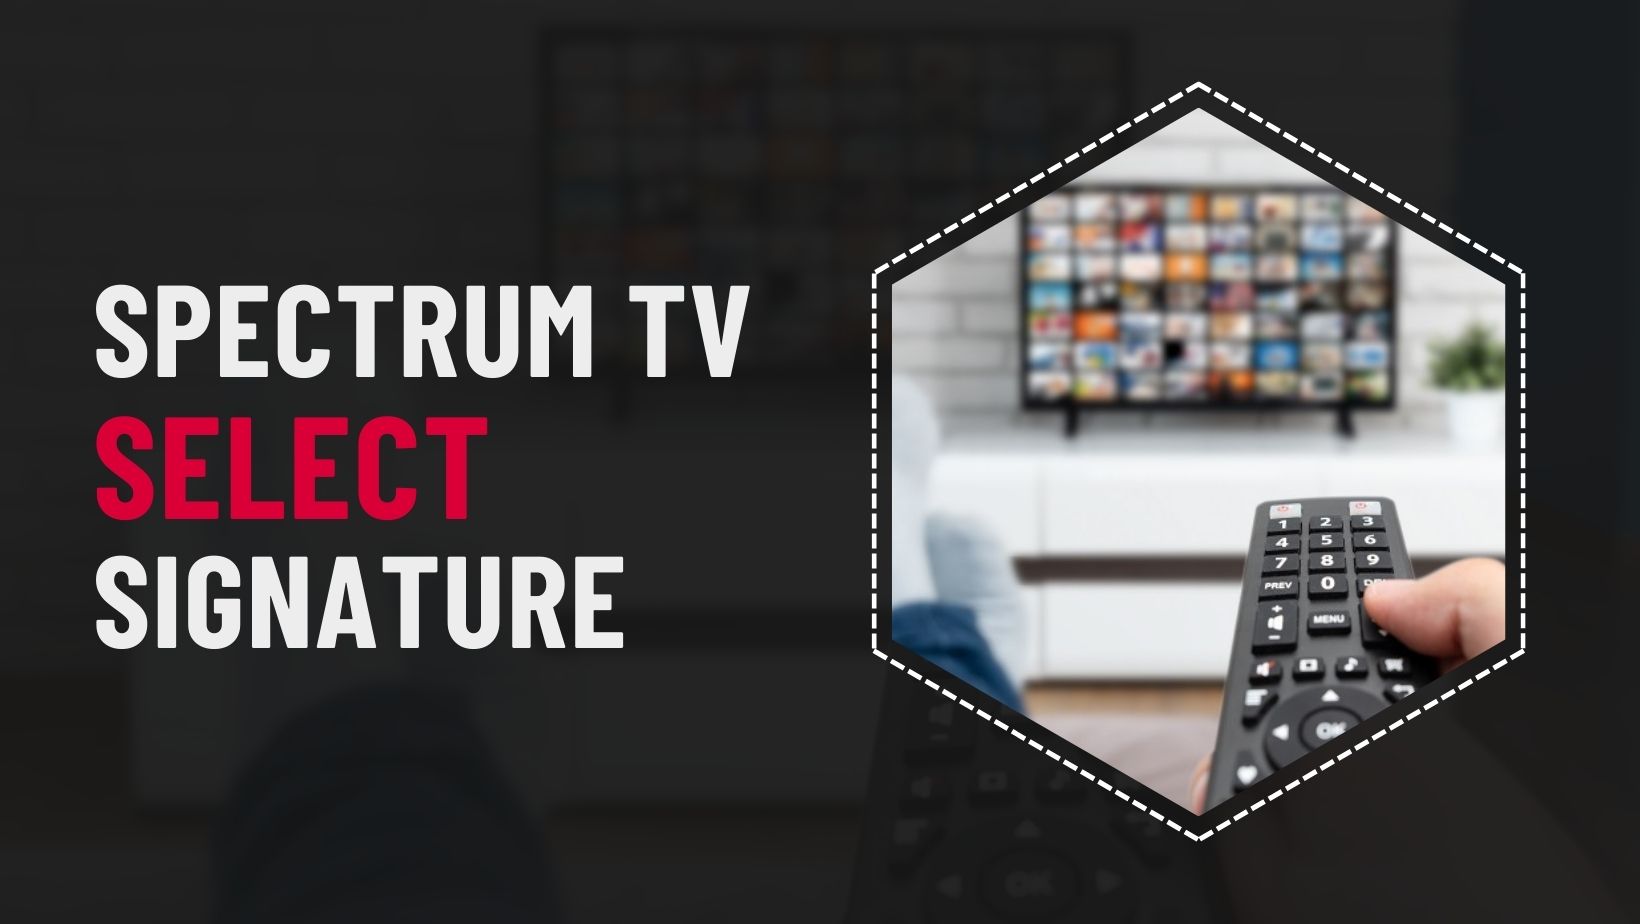 channel lineup spectrum tv choice package